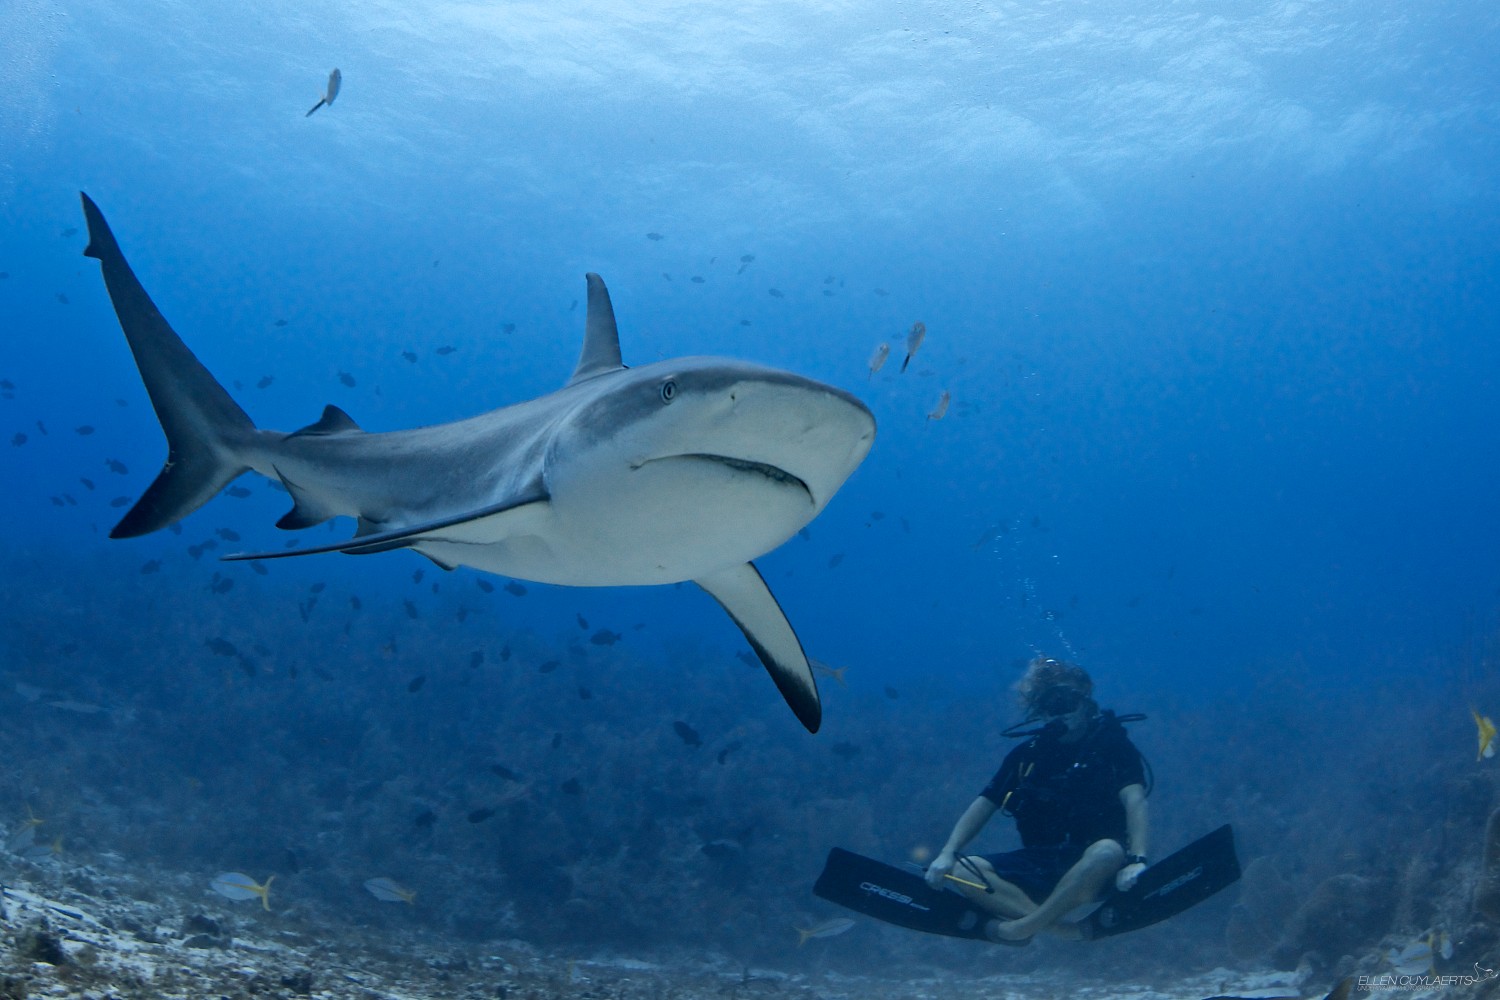 Meet The Fearless Photographer Who Dives With Sharks